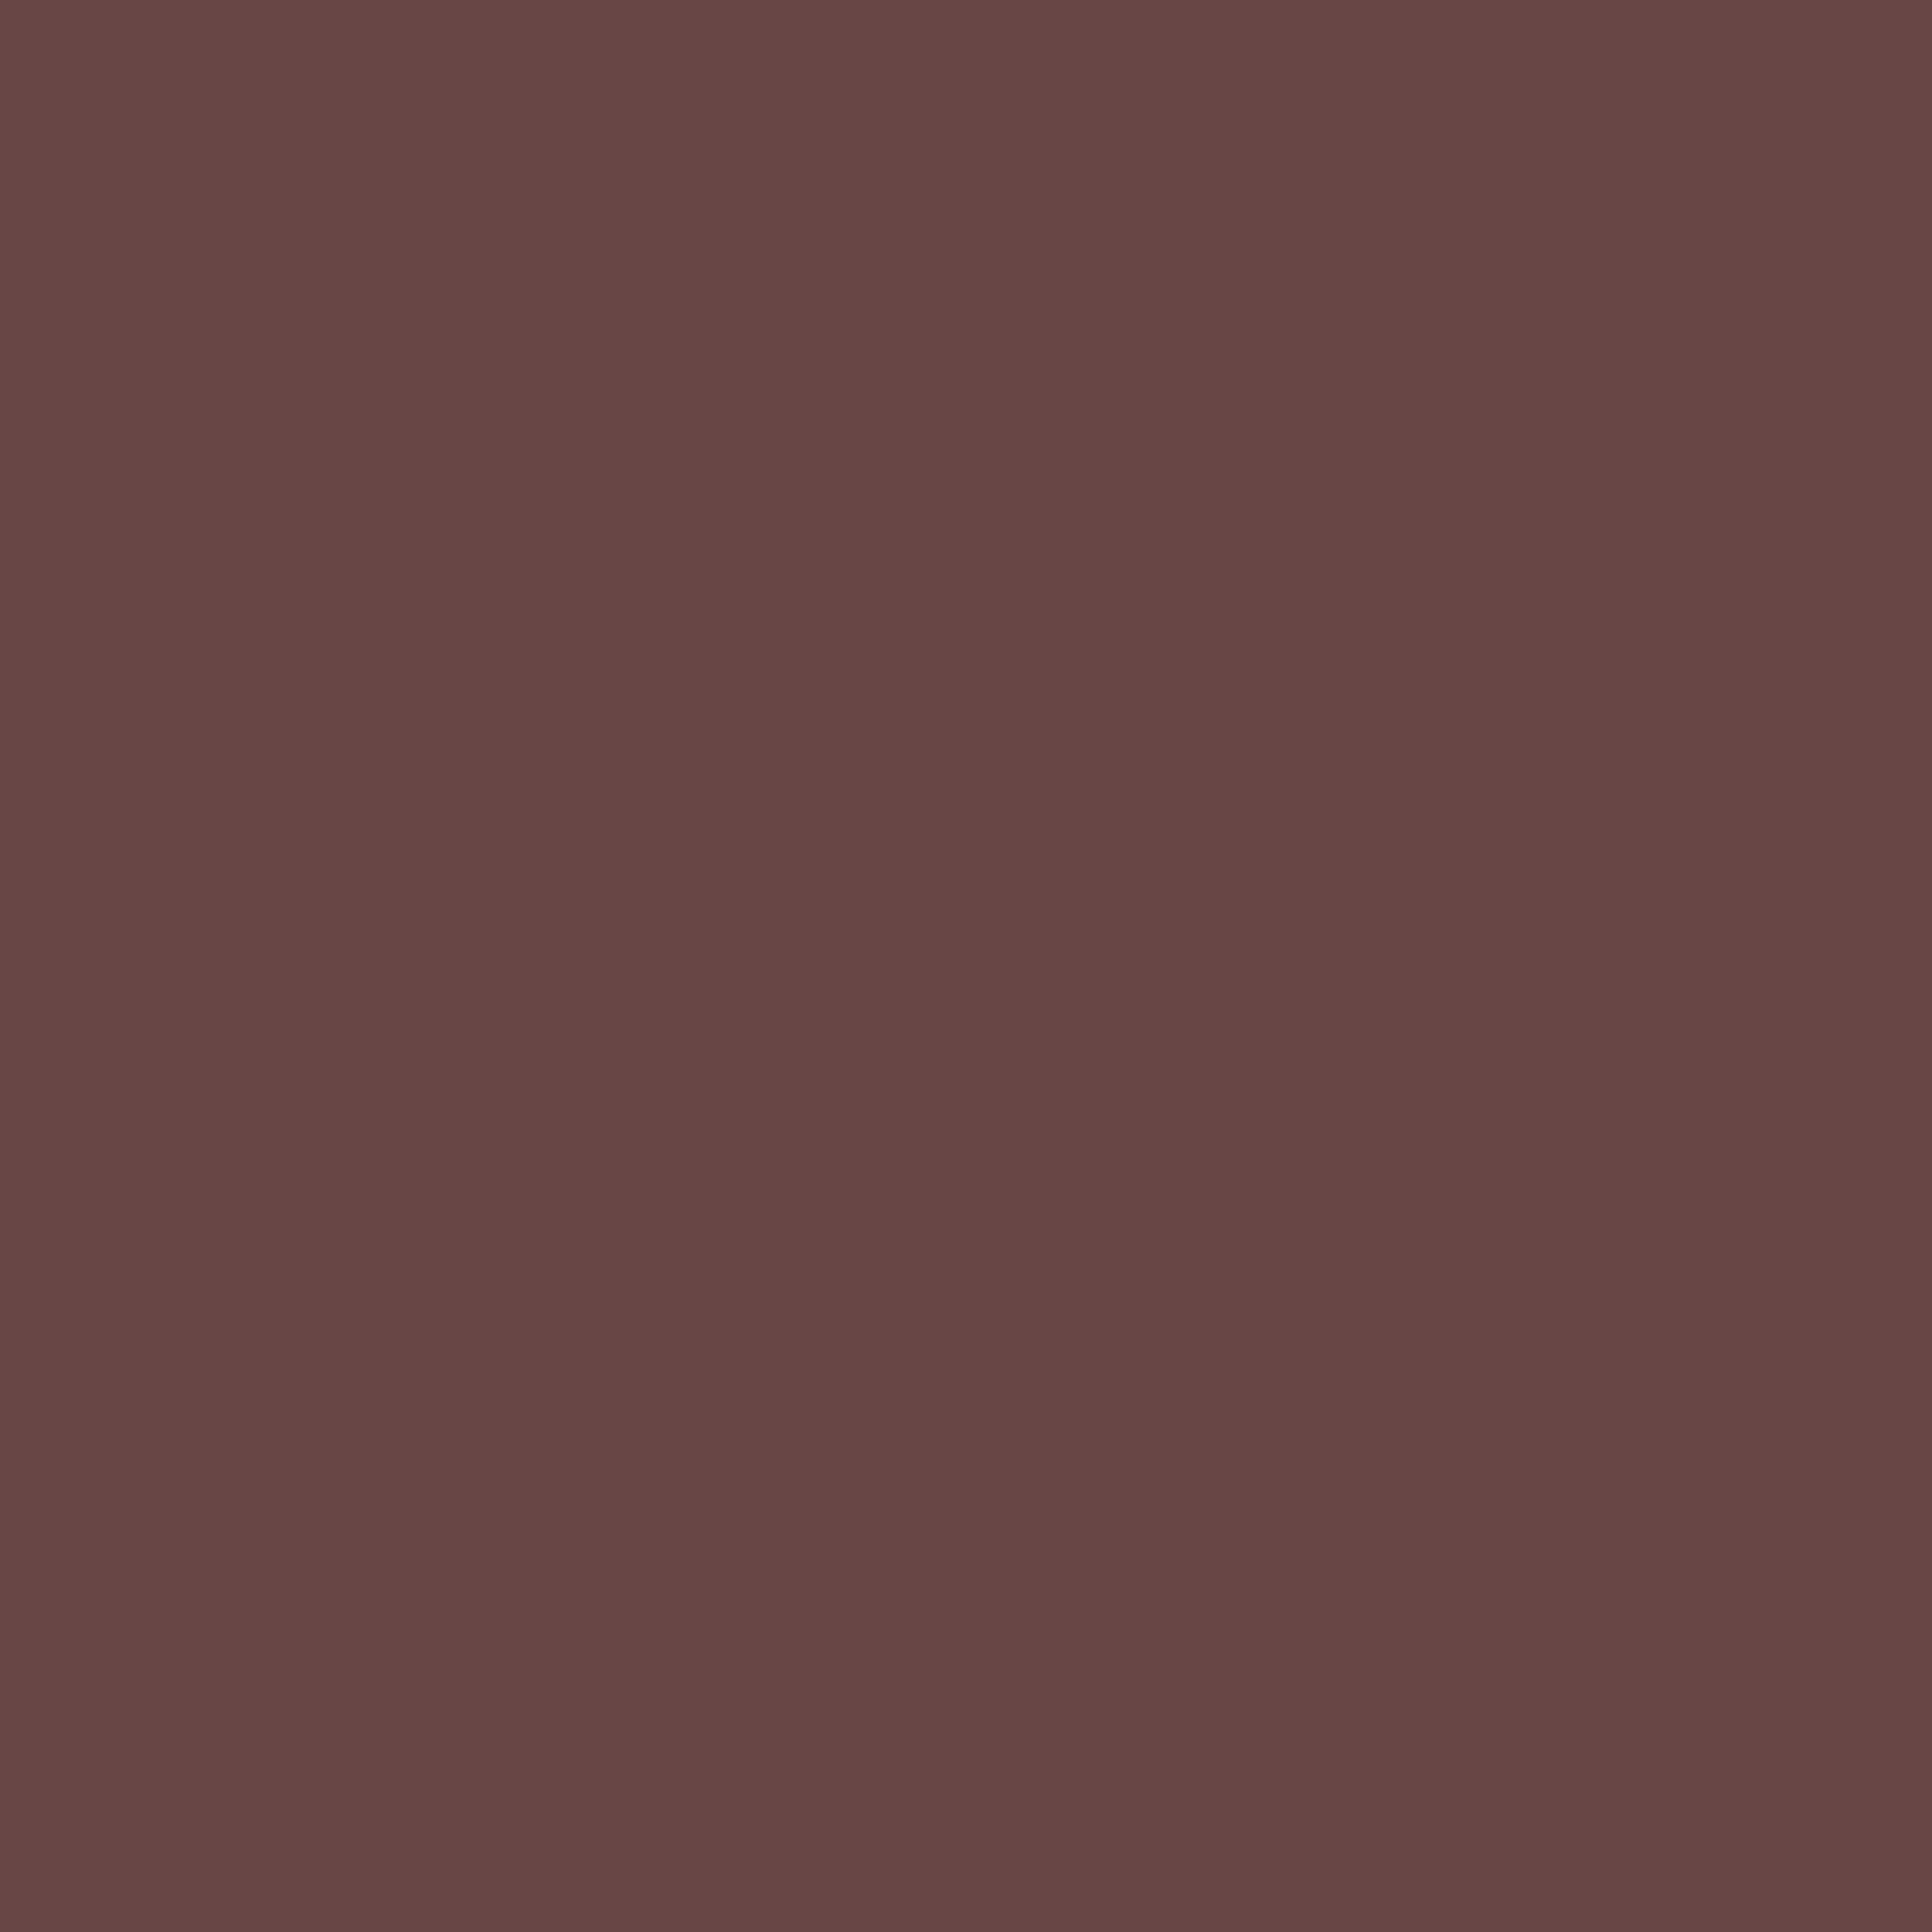 2732x2732 Rose Ebony Solid Color Background